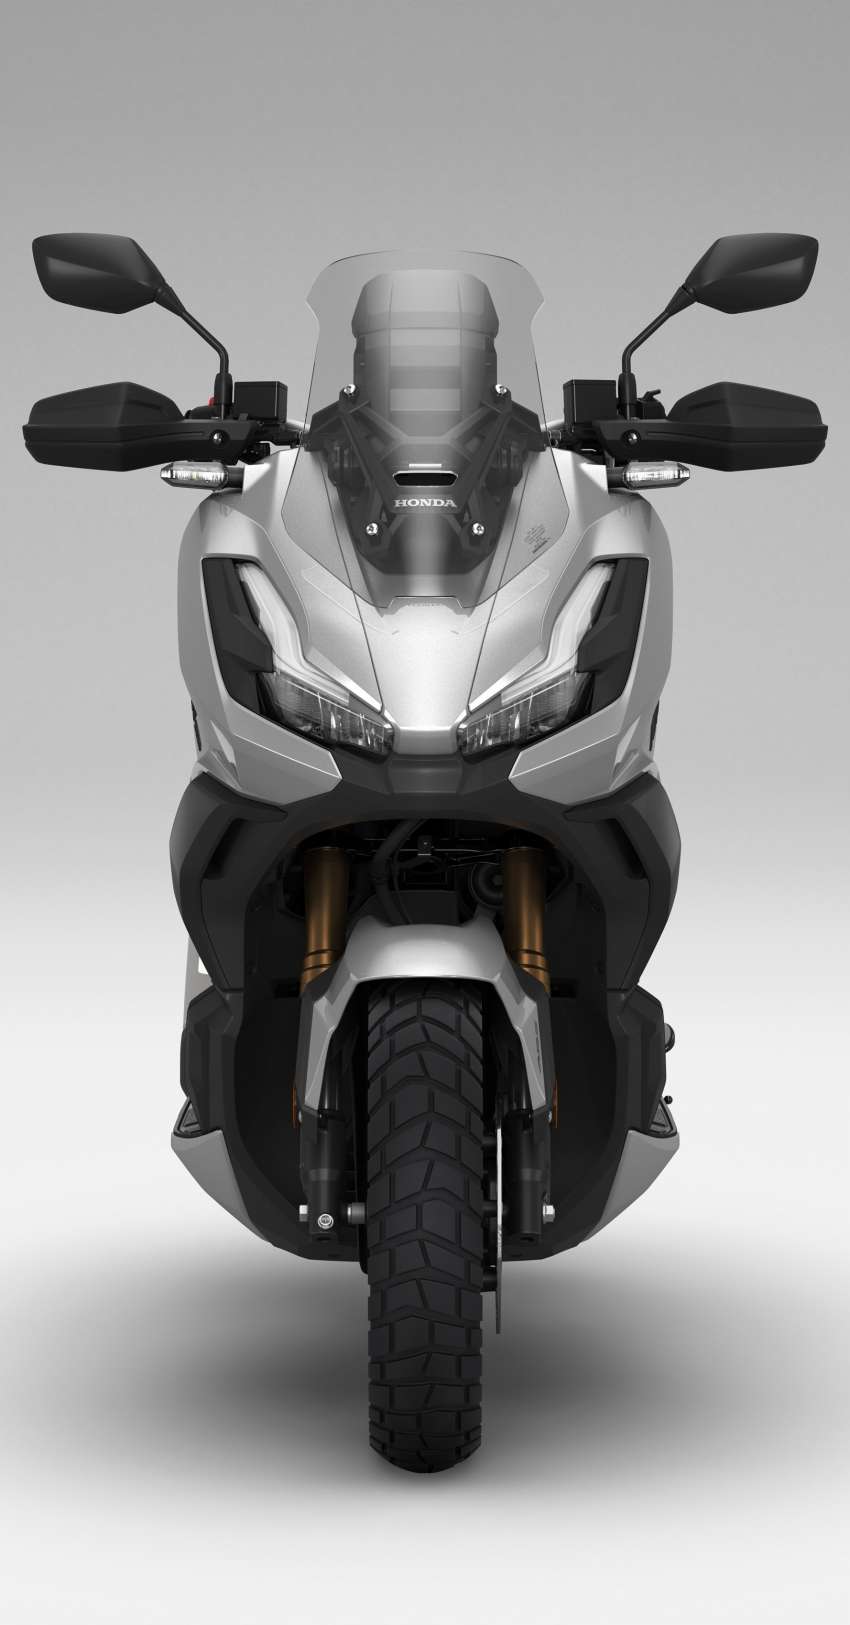 EICMA 2021: Honda ADV350 – 330 cc adventure-styled scooter with app-based Smartphone Voice Control 1382137